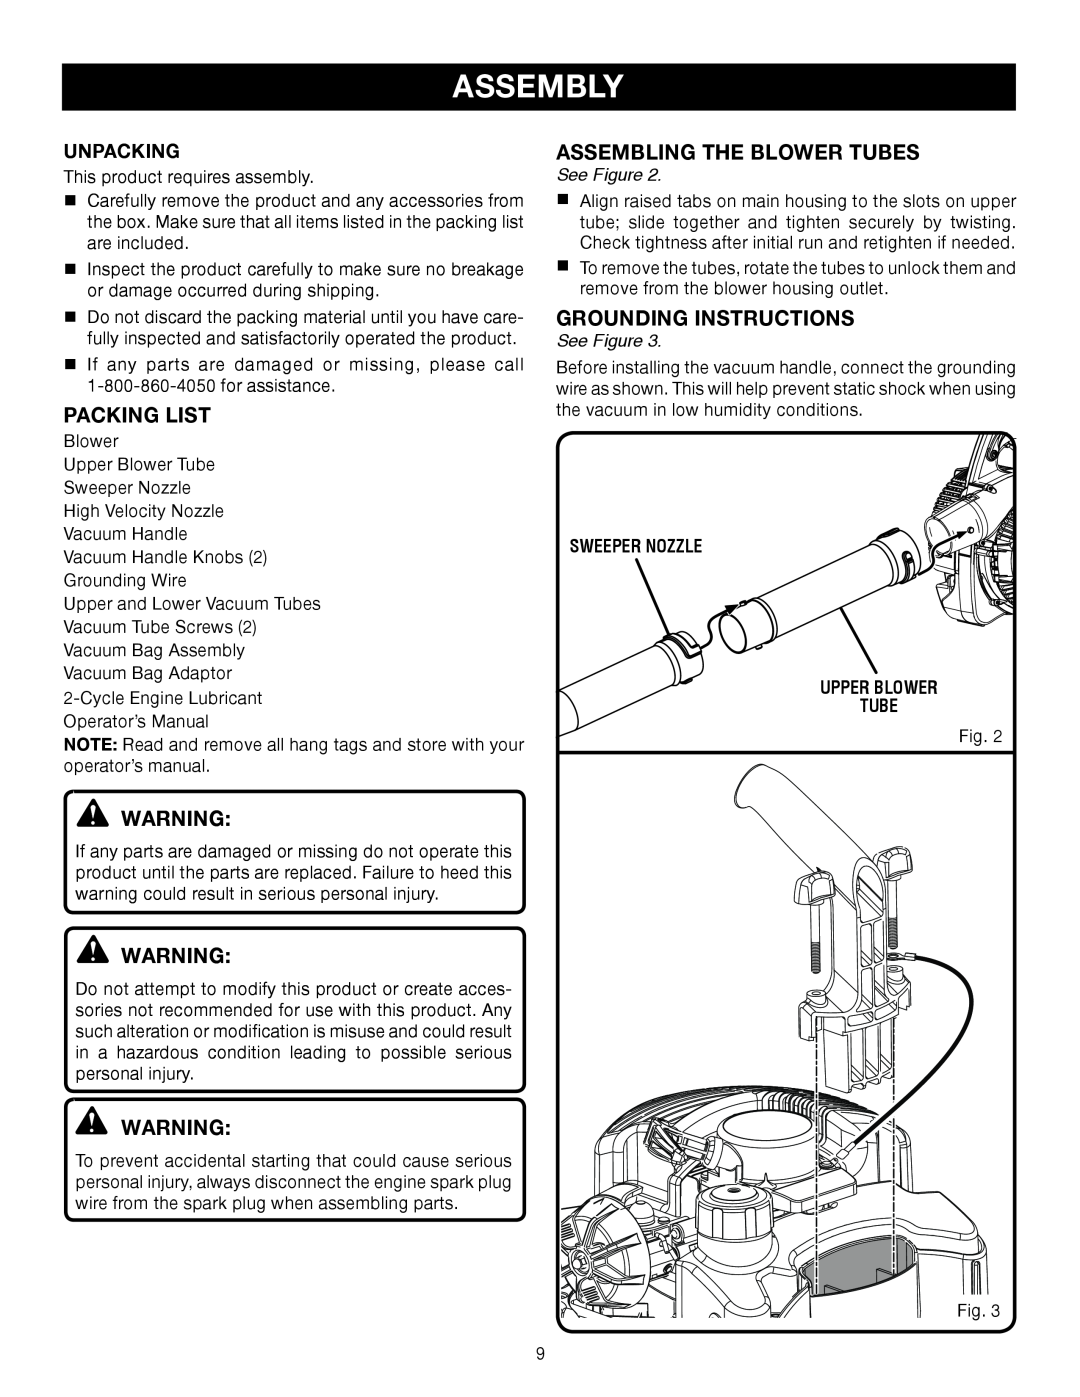 Ryobi RY08554, RY09907 manual Assembly, Packing List, Assembling The Blower Tubes, grounding instructions, See Figure 